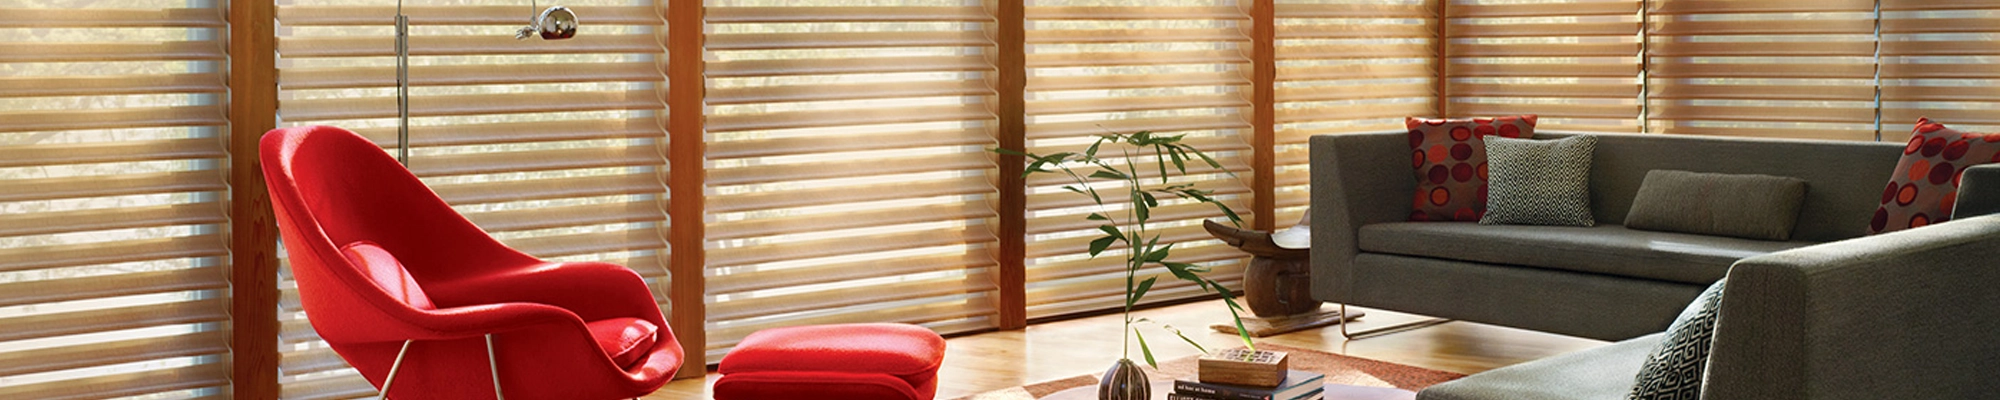 Window treatments provided by Gilbert's CarpetsPlus COLORTILE